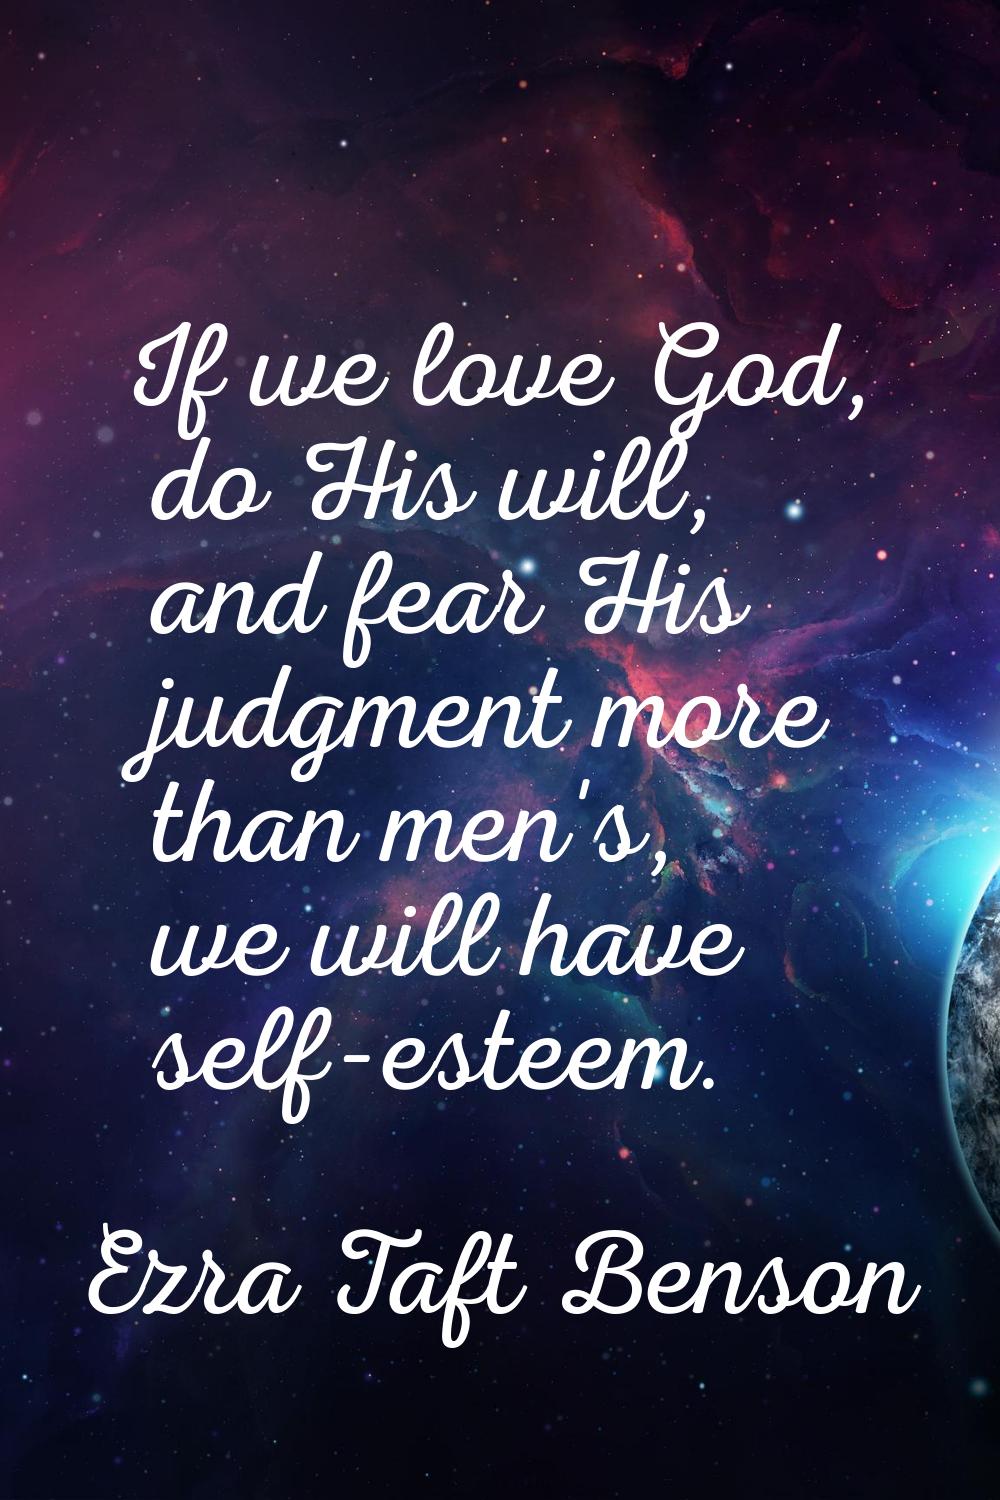 If we love God, do His will, and fear His judgment more than men's, we will have self-esteem.